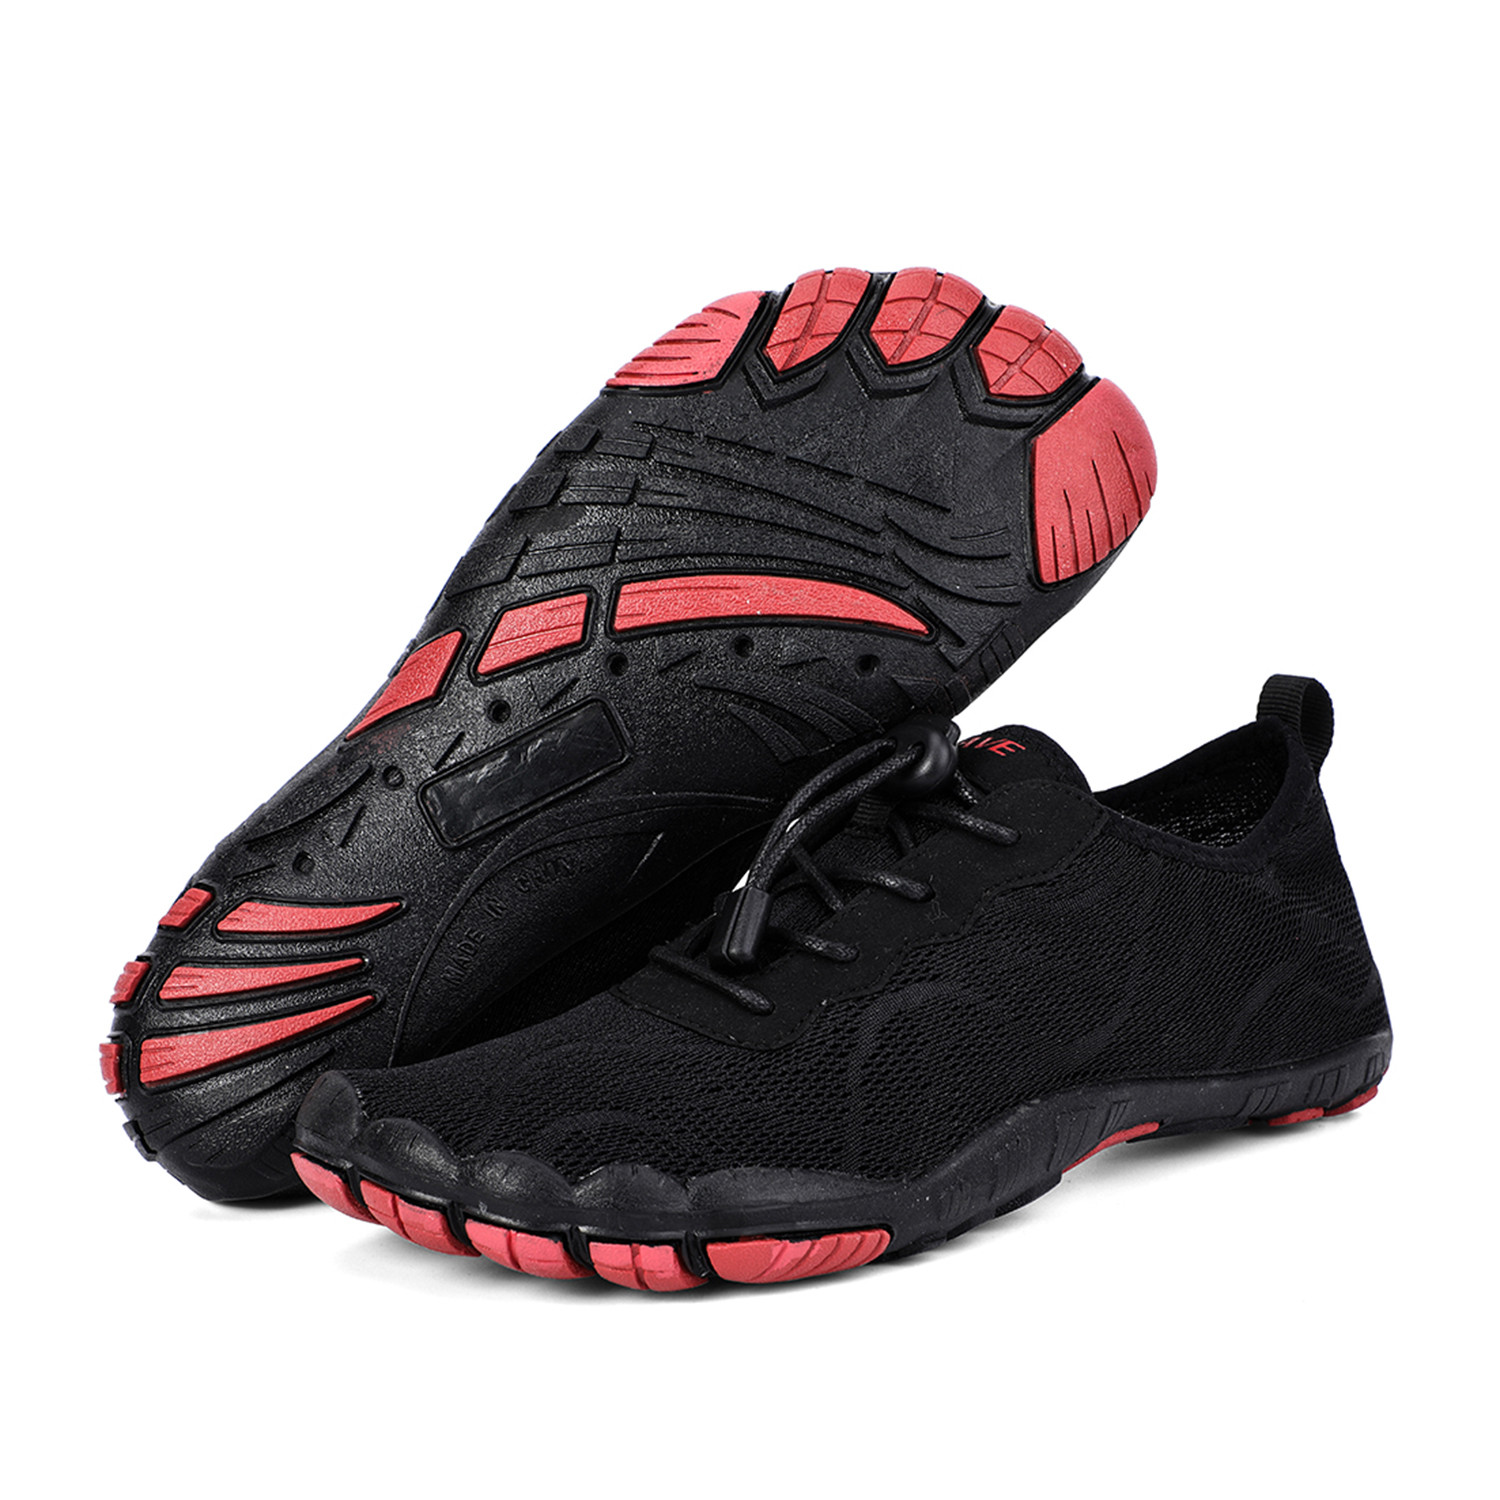 Men's Barefoot Mesh Water Shoes // Black + Red (US: 7) - Clearance ...